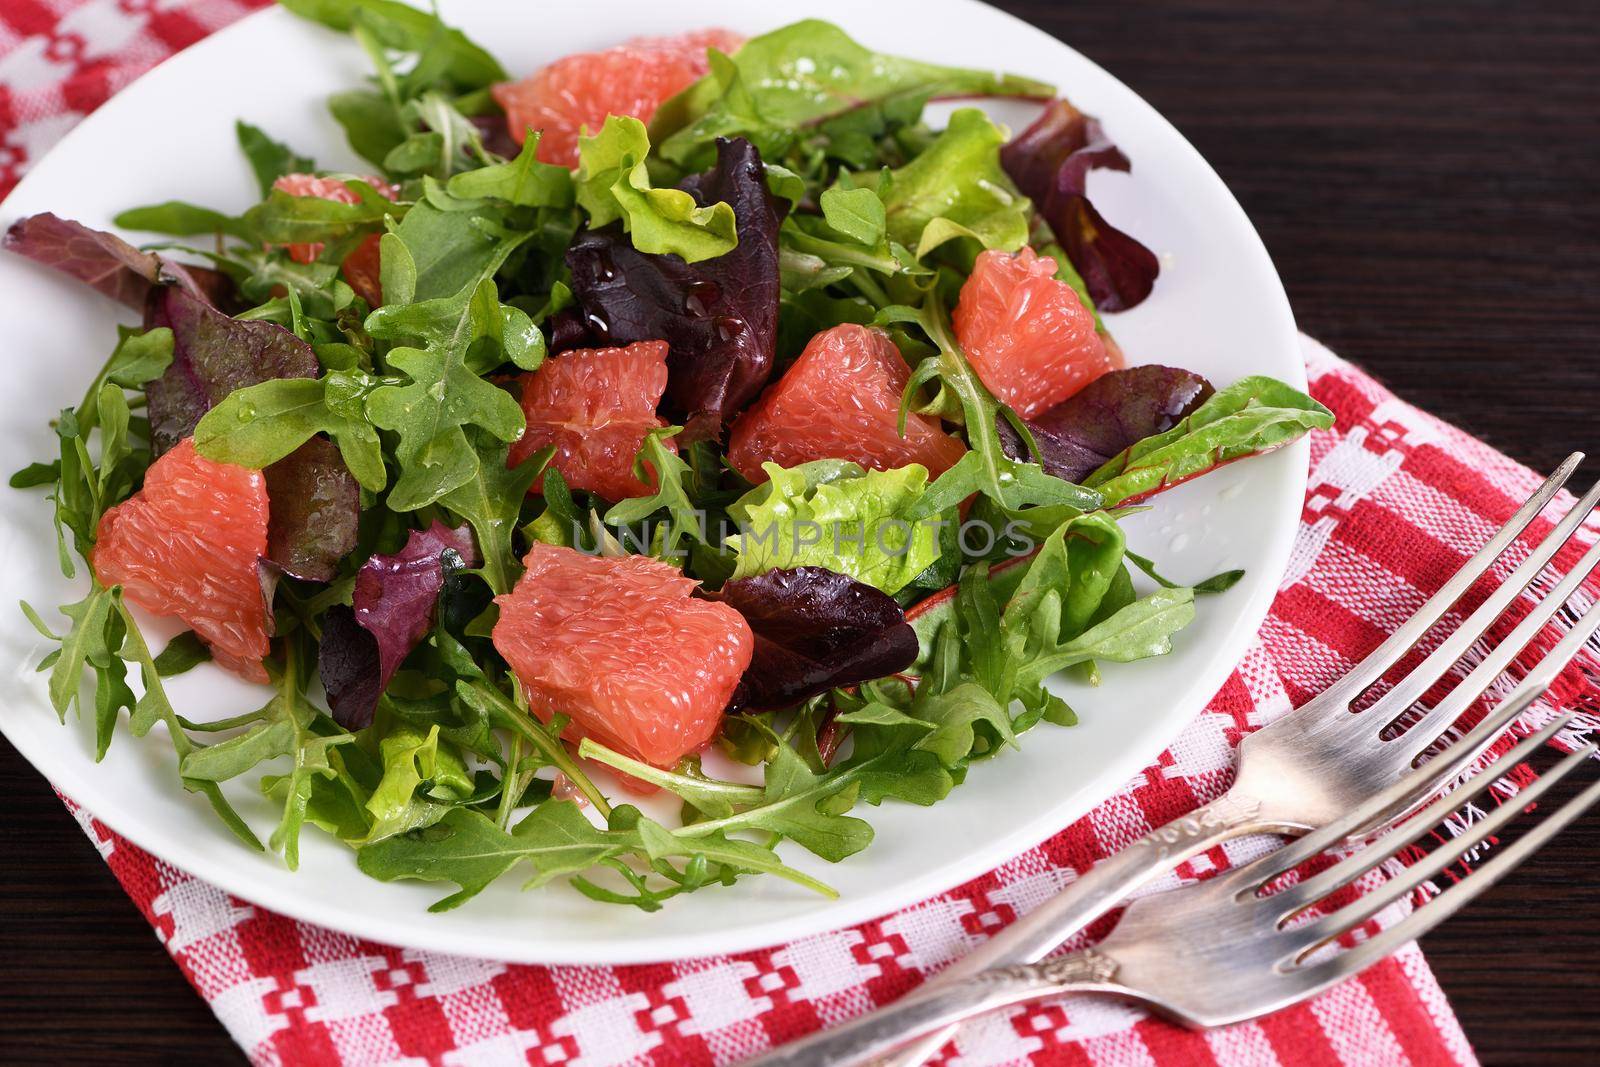 Salad from a mix of lettuce and grapefruit by Apolonia